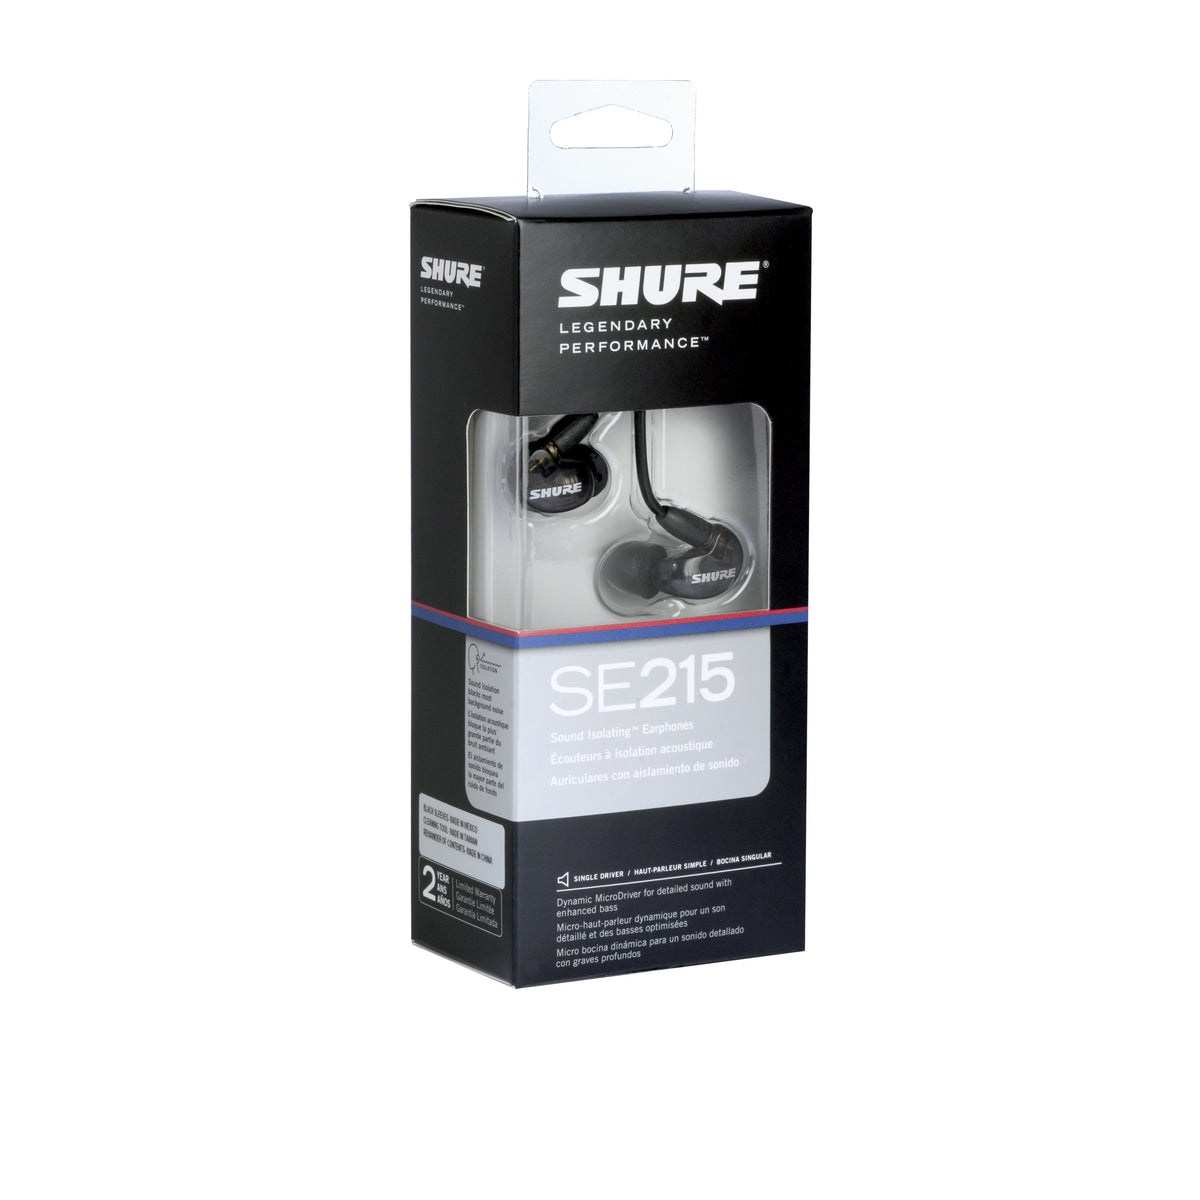 Shure SE215-CL Sound Isolation Headphones with Dynamic Microdriver